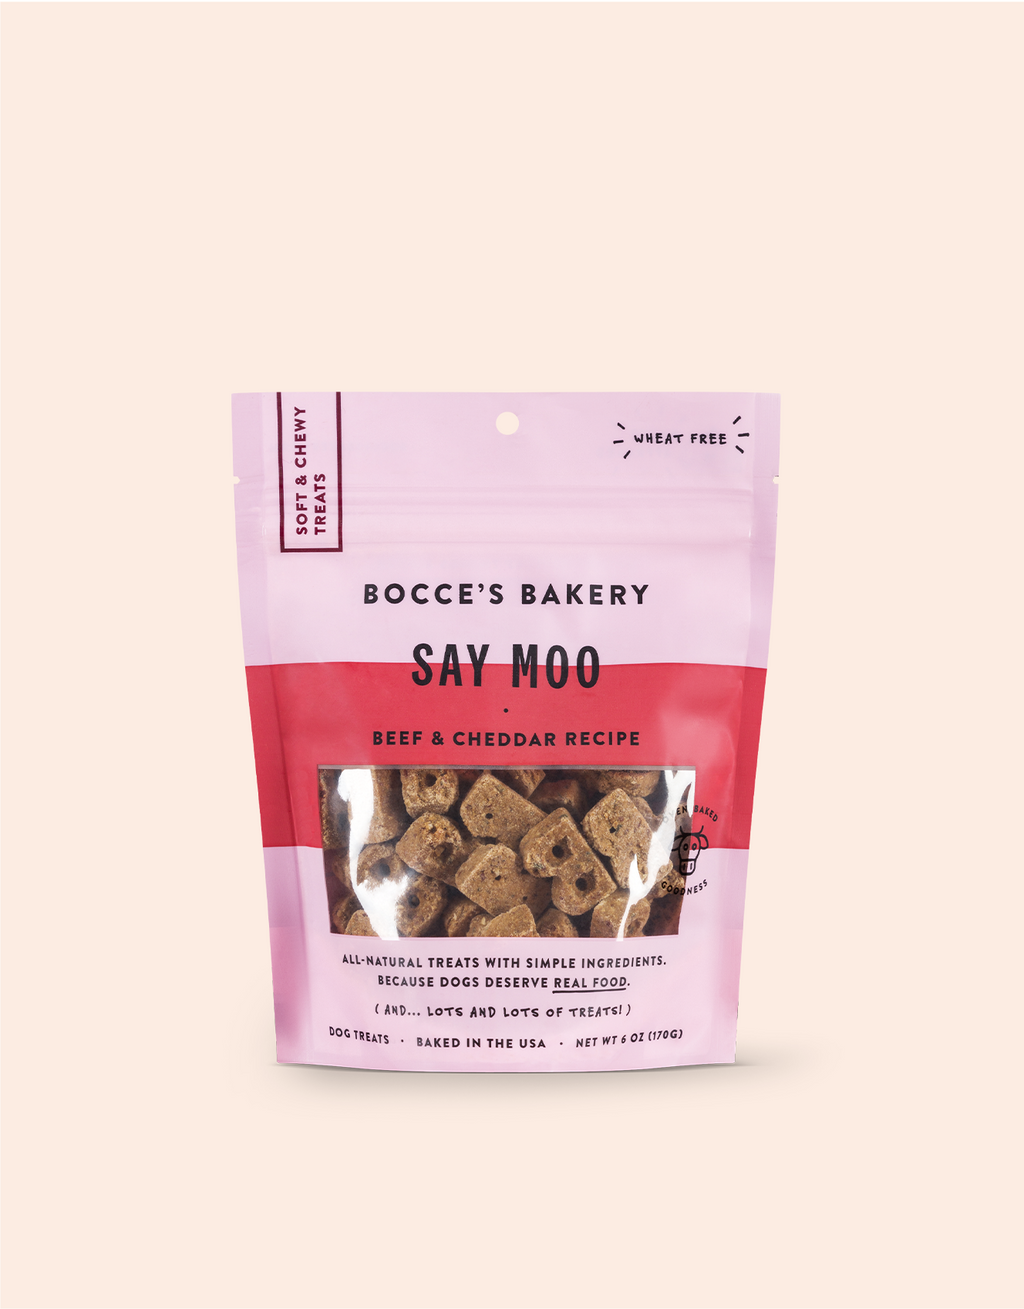 Bocce's "Say Moo" Soft & Chewy Dog Treats